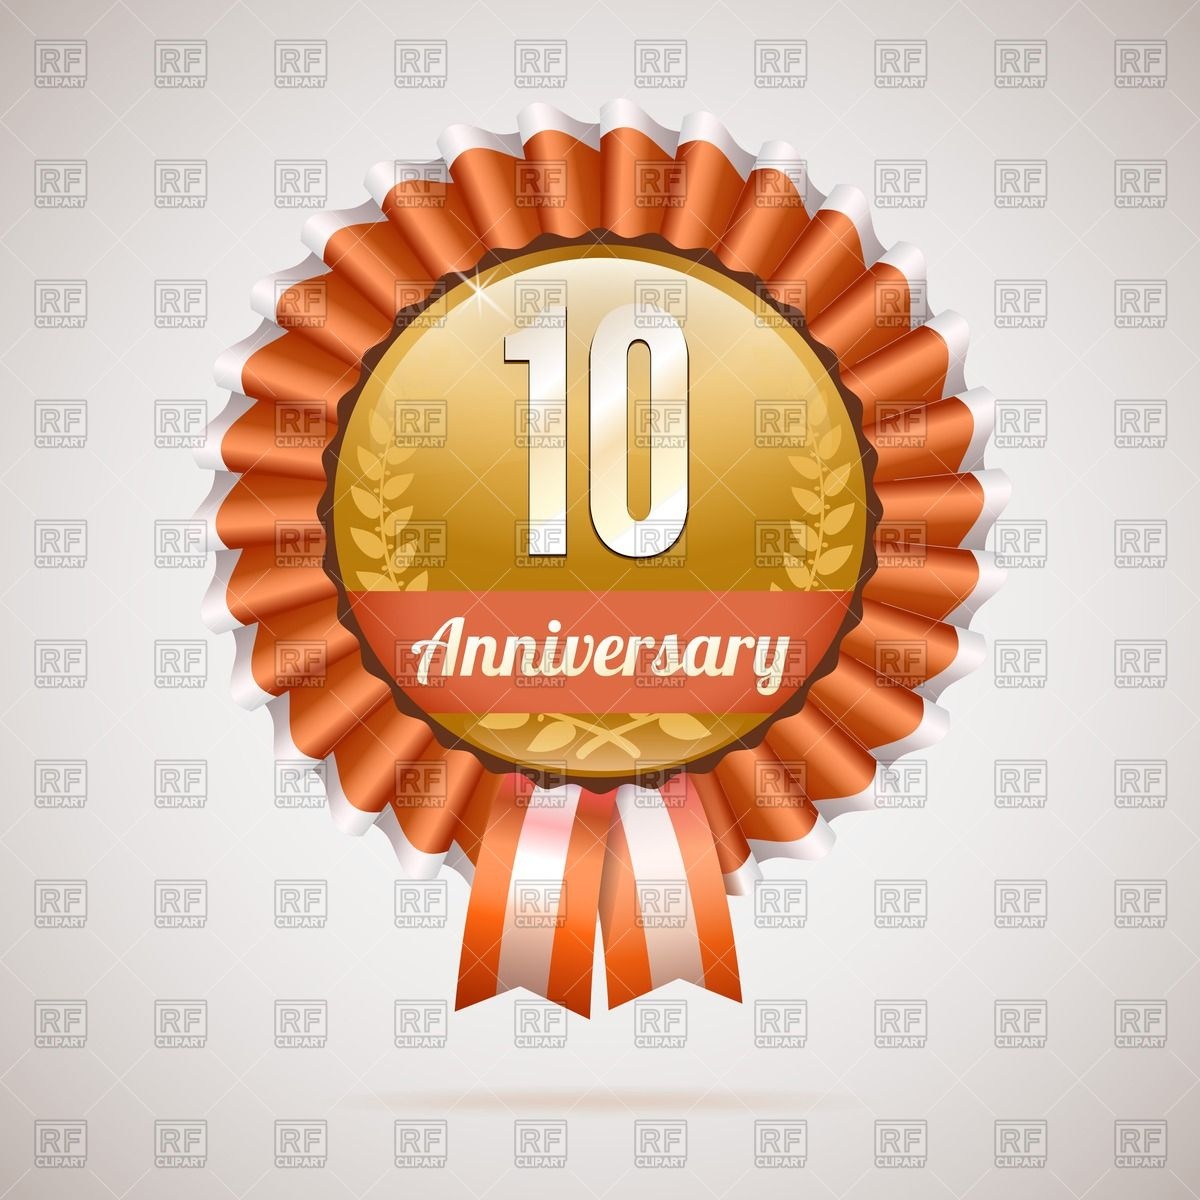 10 Years Anniversary Golden Prise Rosette Objects Download Royalty